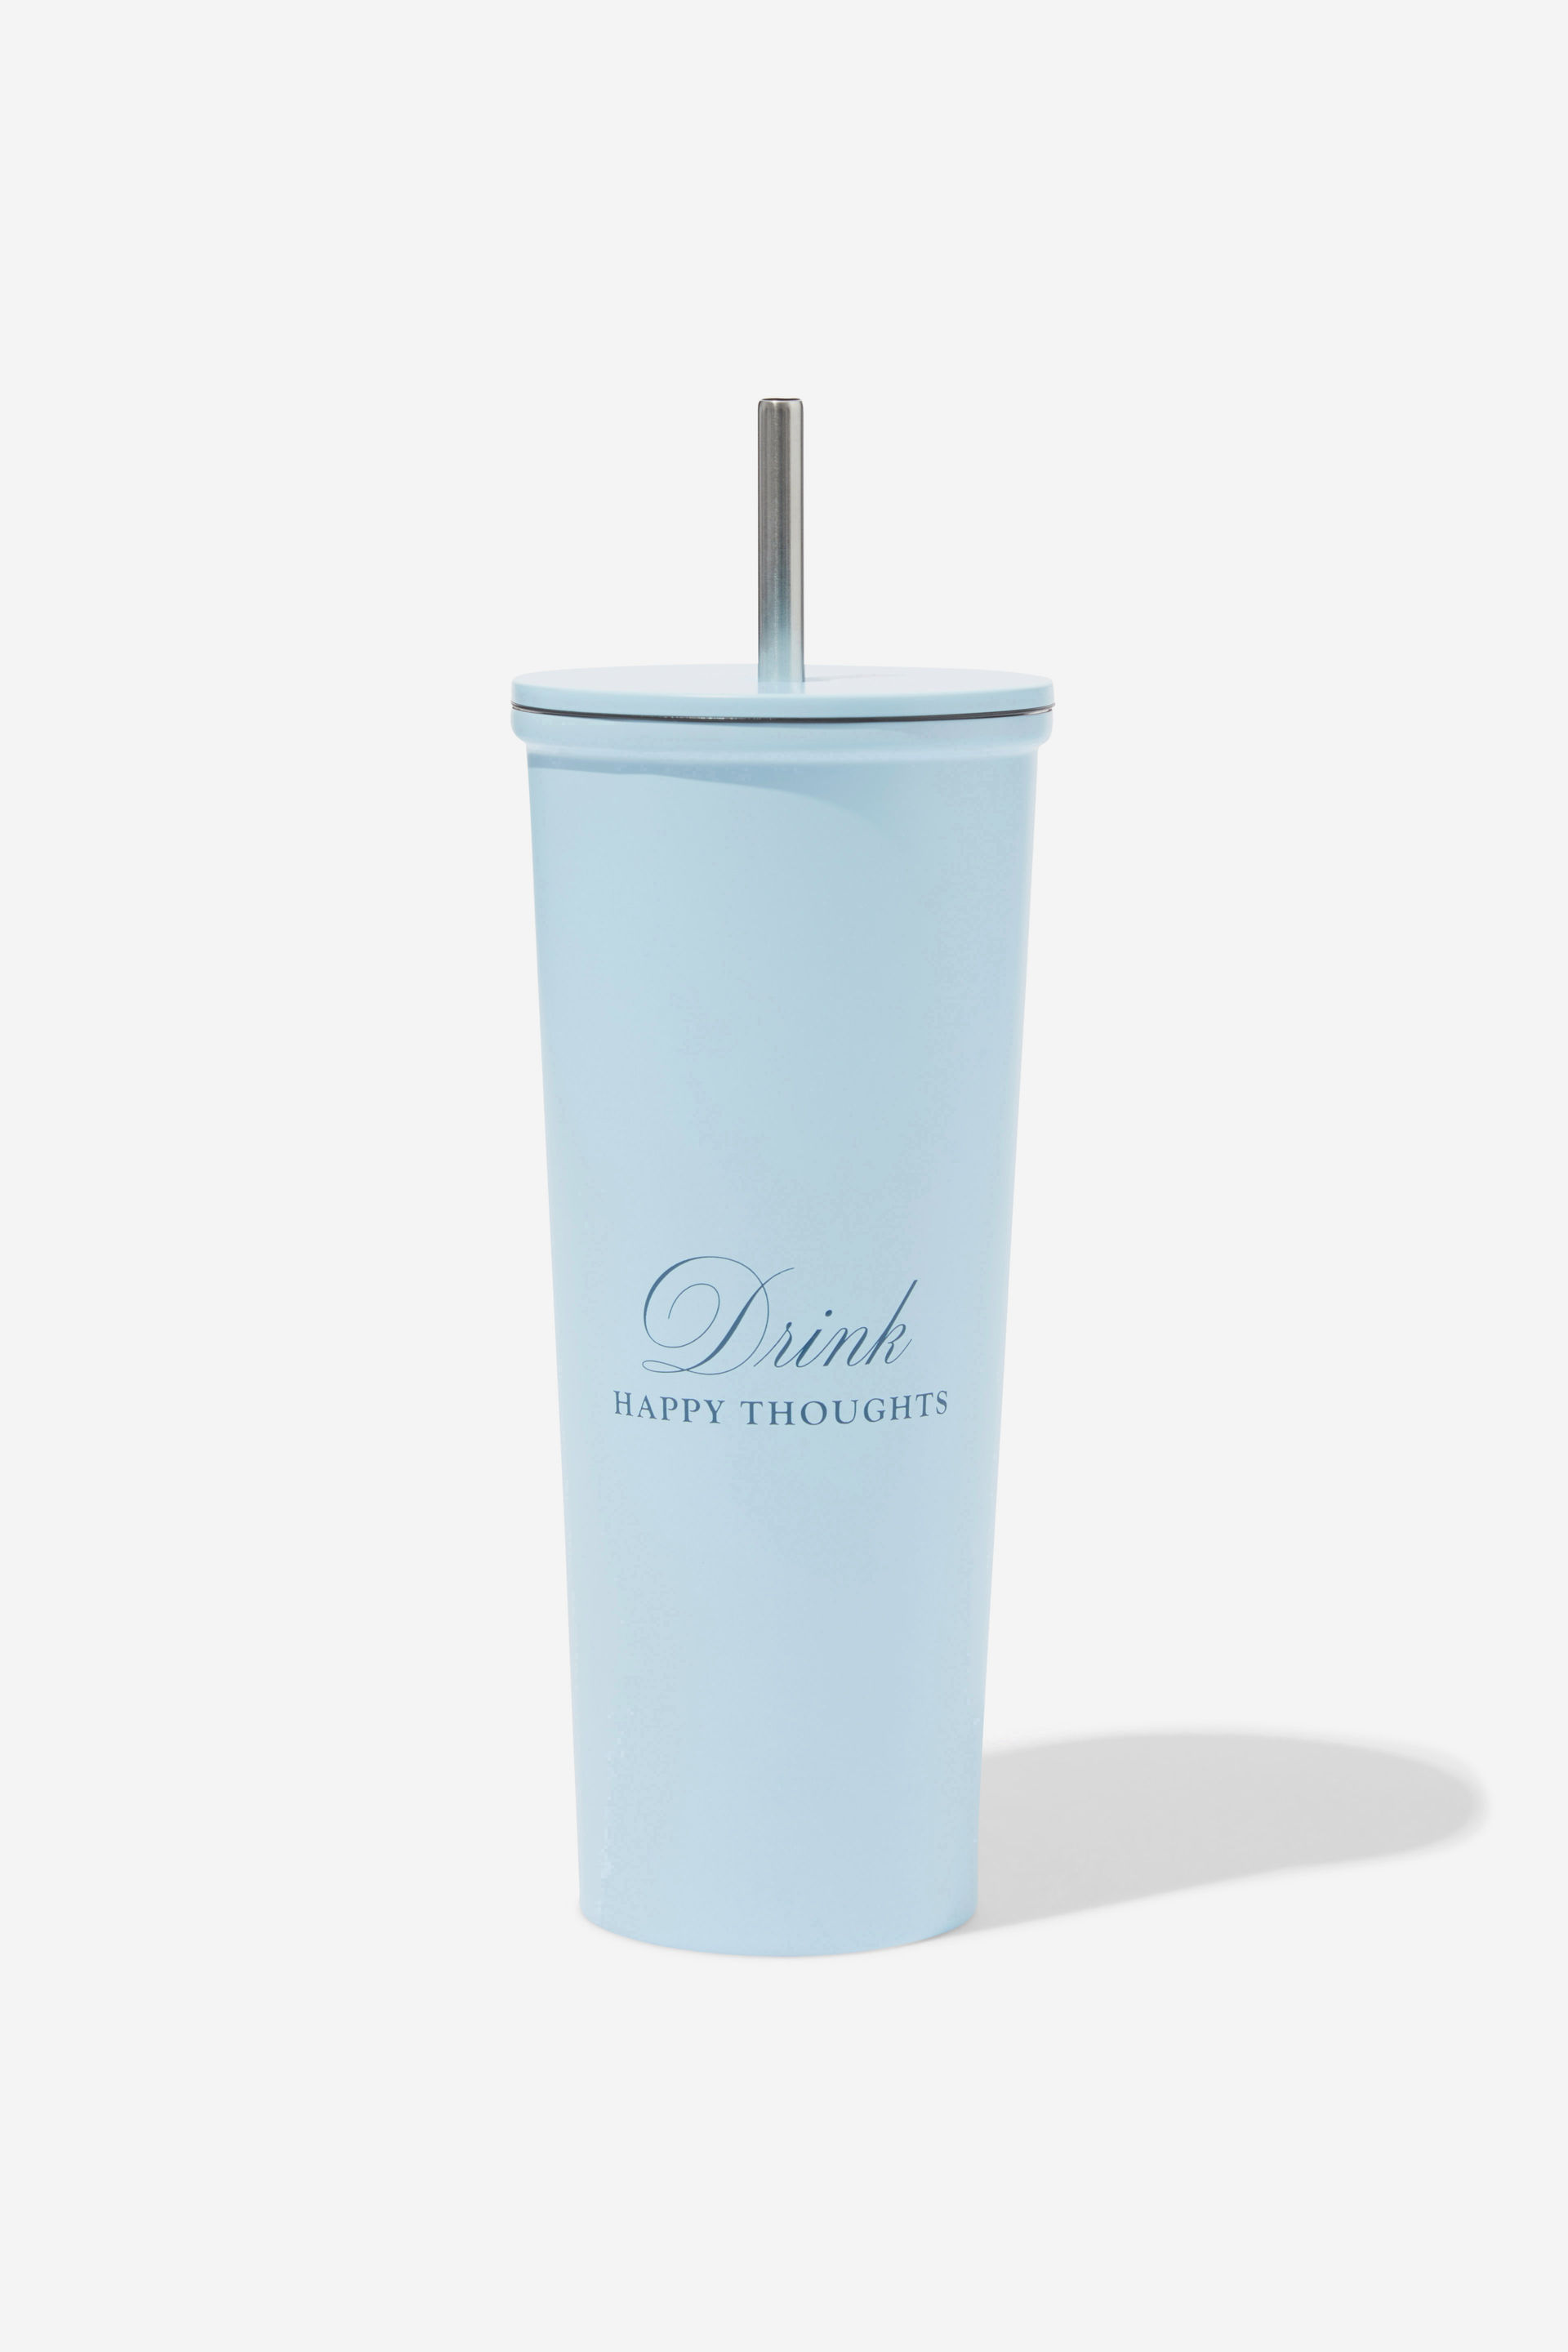 Typo - Metal Smoothie Cup - Drink happy thoughts blue